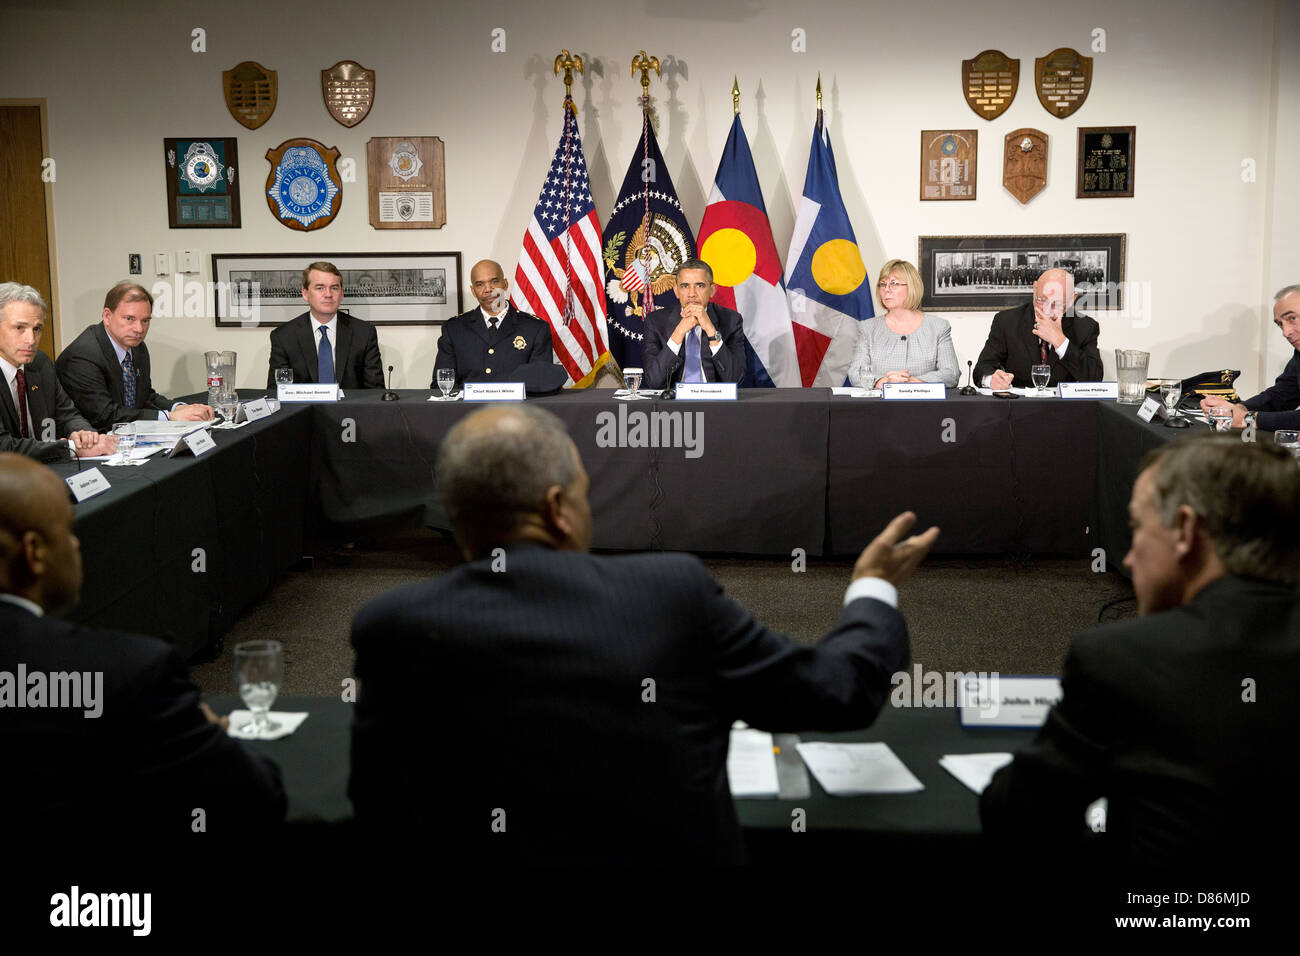 US President Barack Obama participates in a roundtable discussion on gun violence with local law enforcement officials and community leaders at the Denver Police Academy April 3, 2013 in Denver, CO. Stock Photo